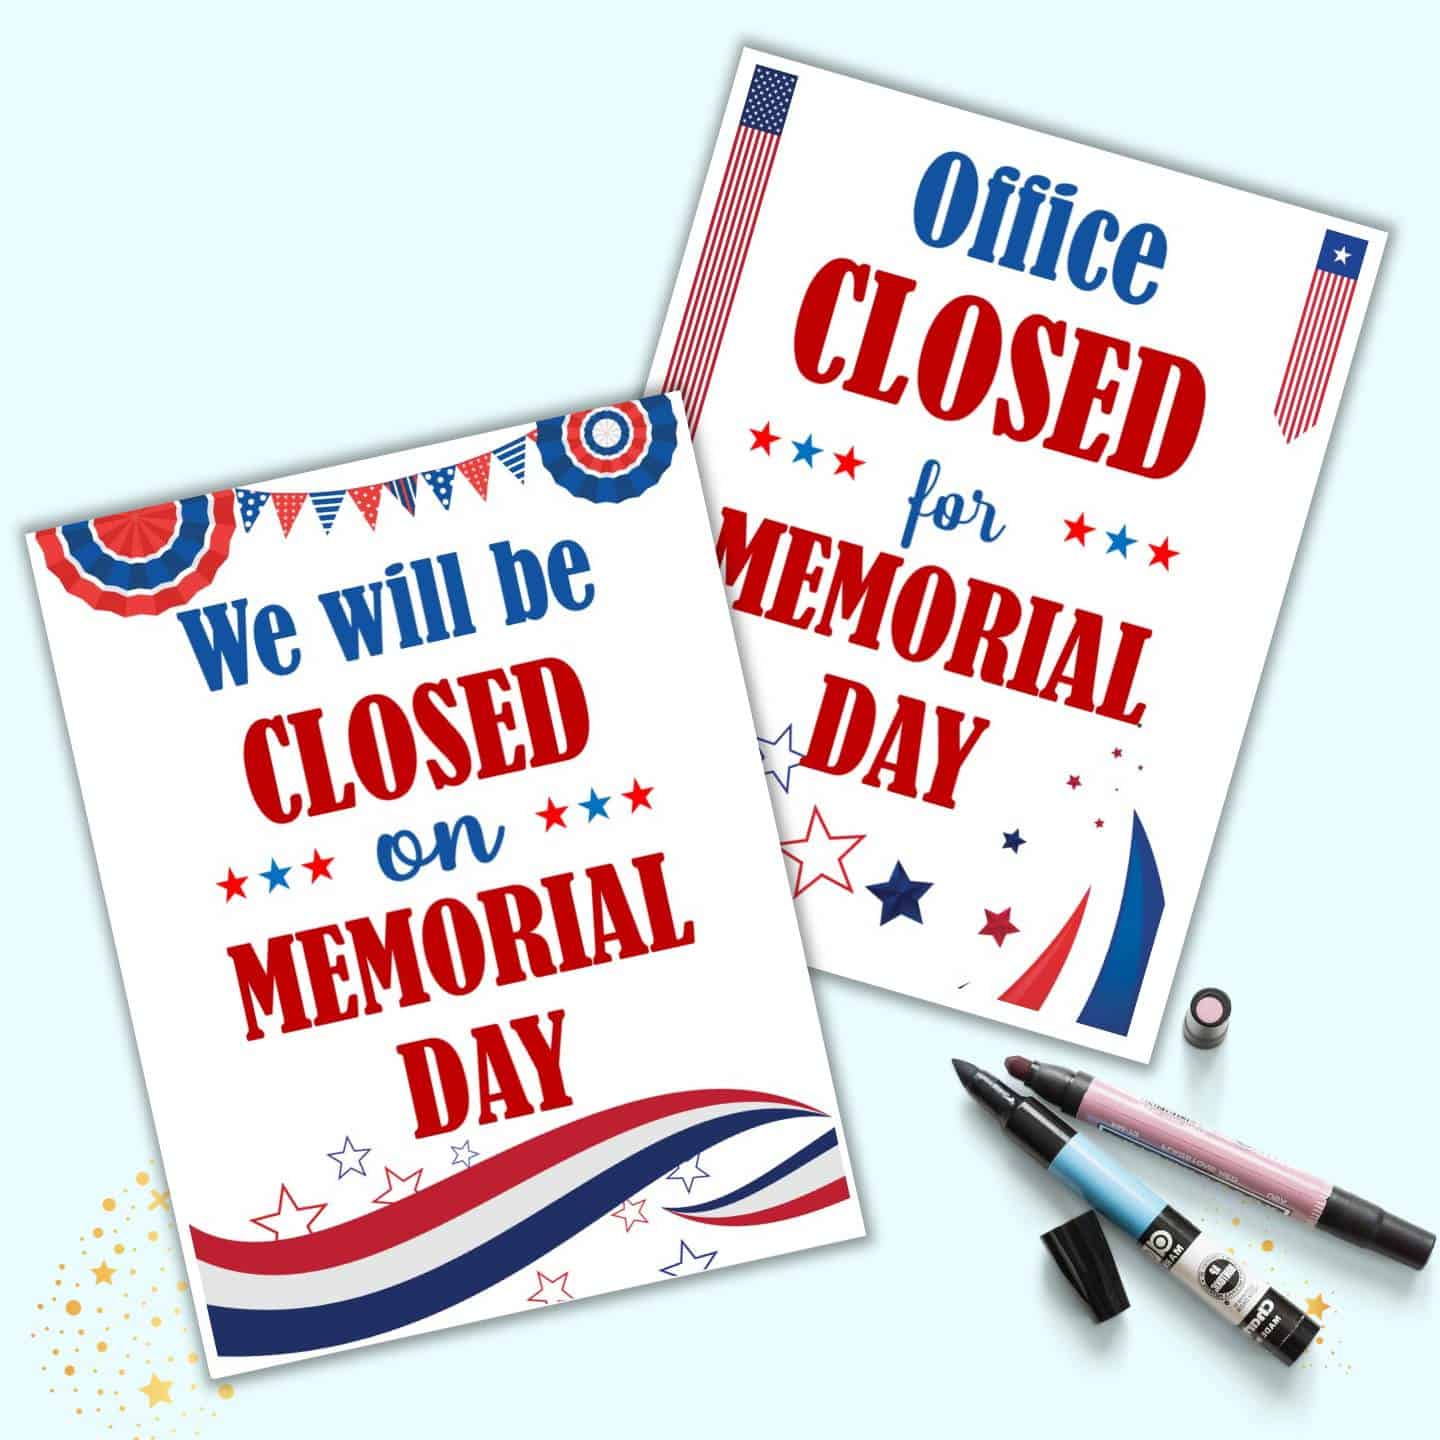 printable-sign-closed-memorial-day-example-10-mom-envy